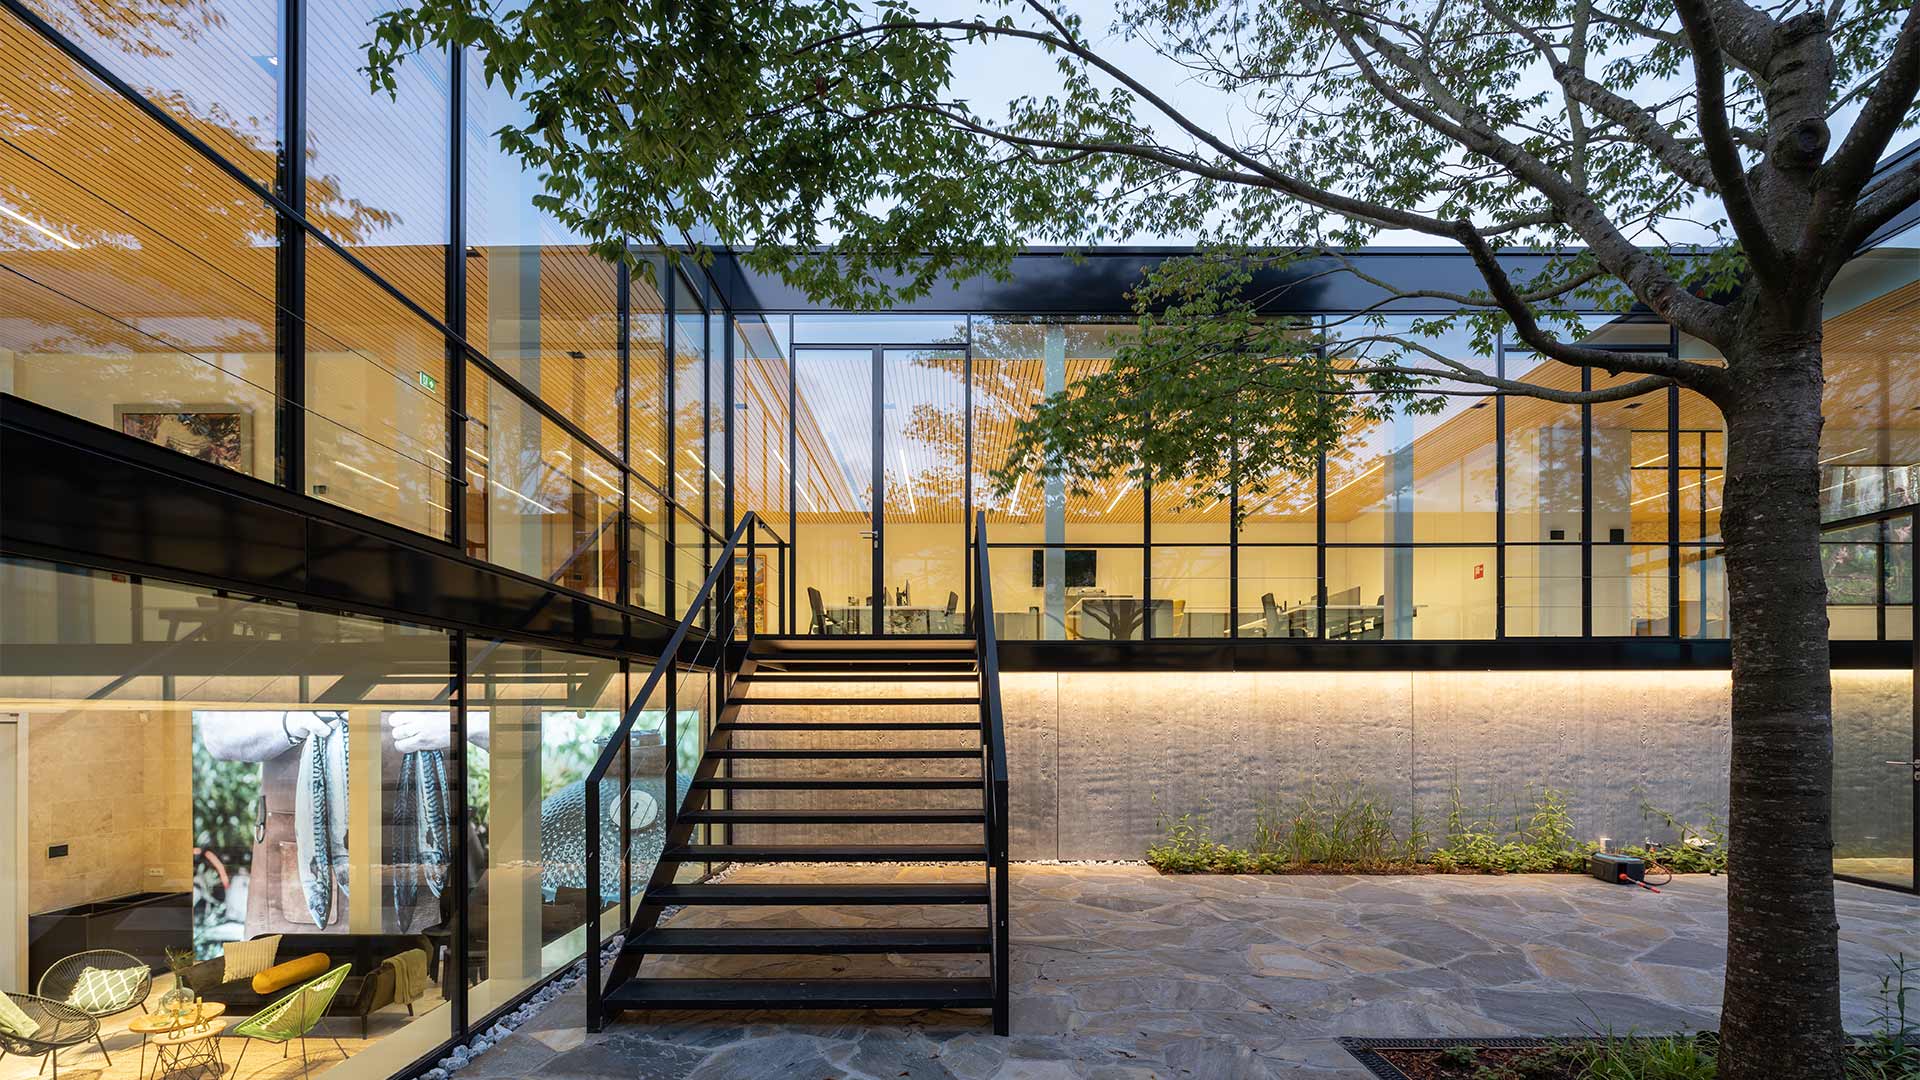 A building with glass walls and a tree